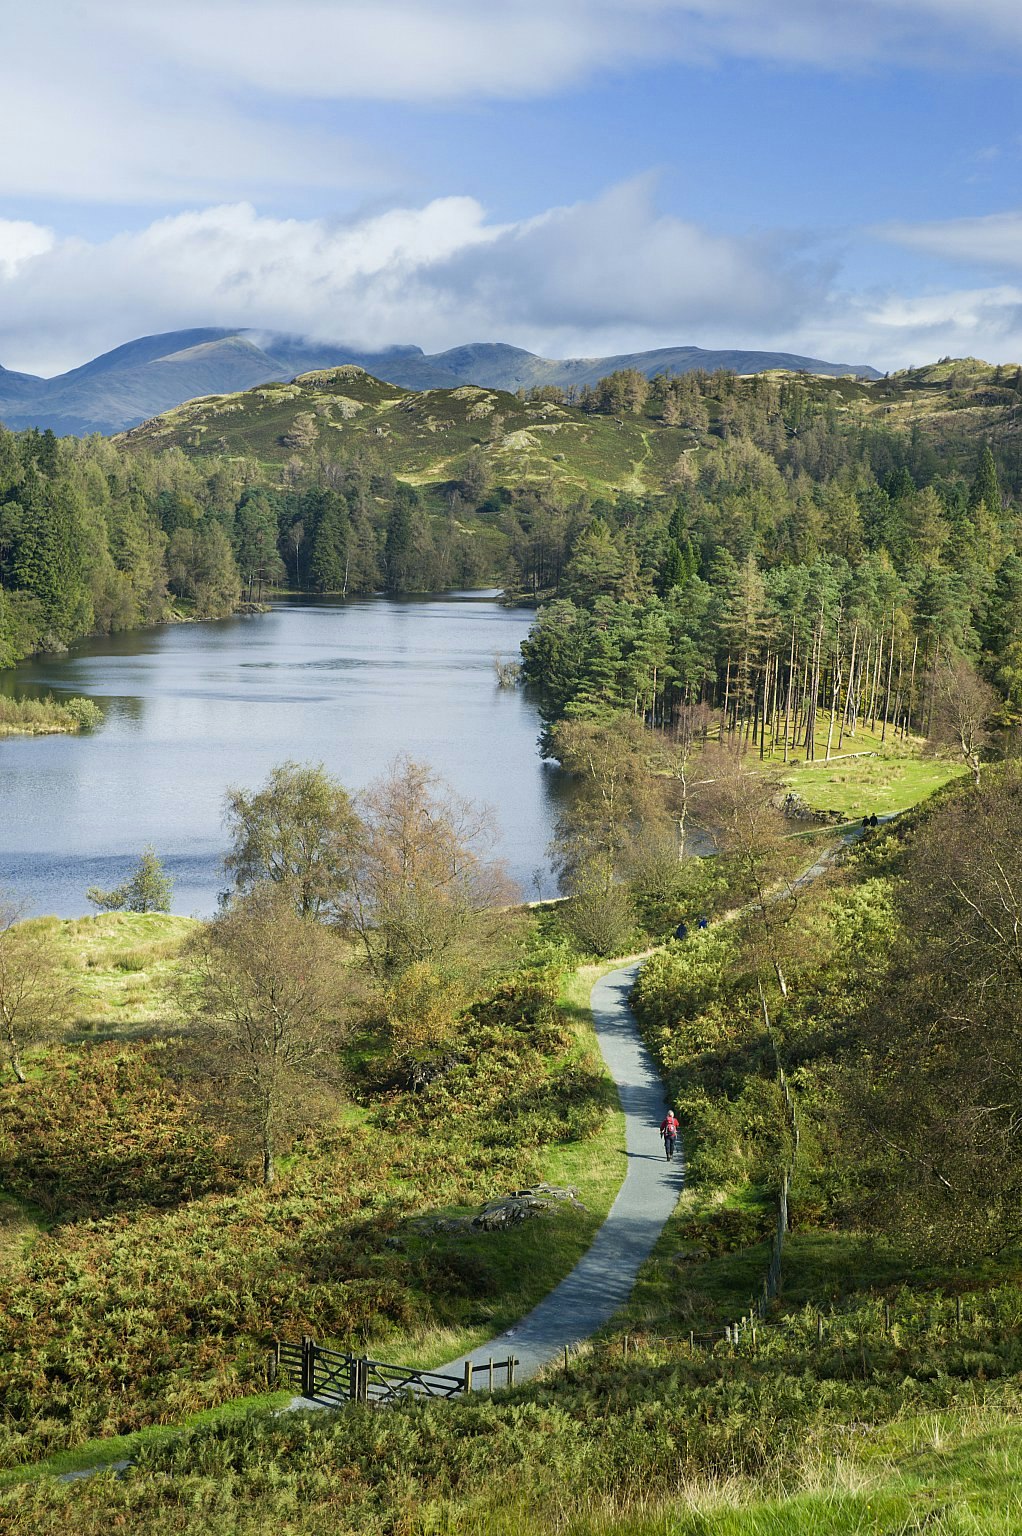 A person walks along a lane next to Tarn Hows, a lake in England's Lake District surrounded by trees and rolling hills.